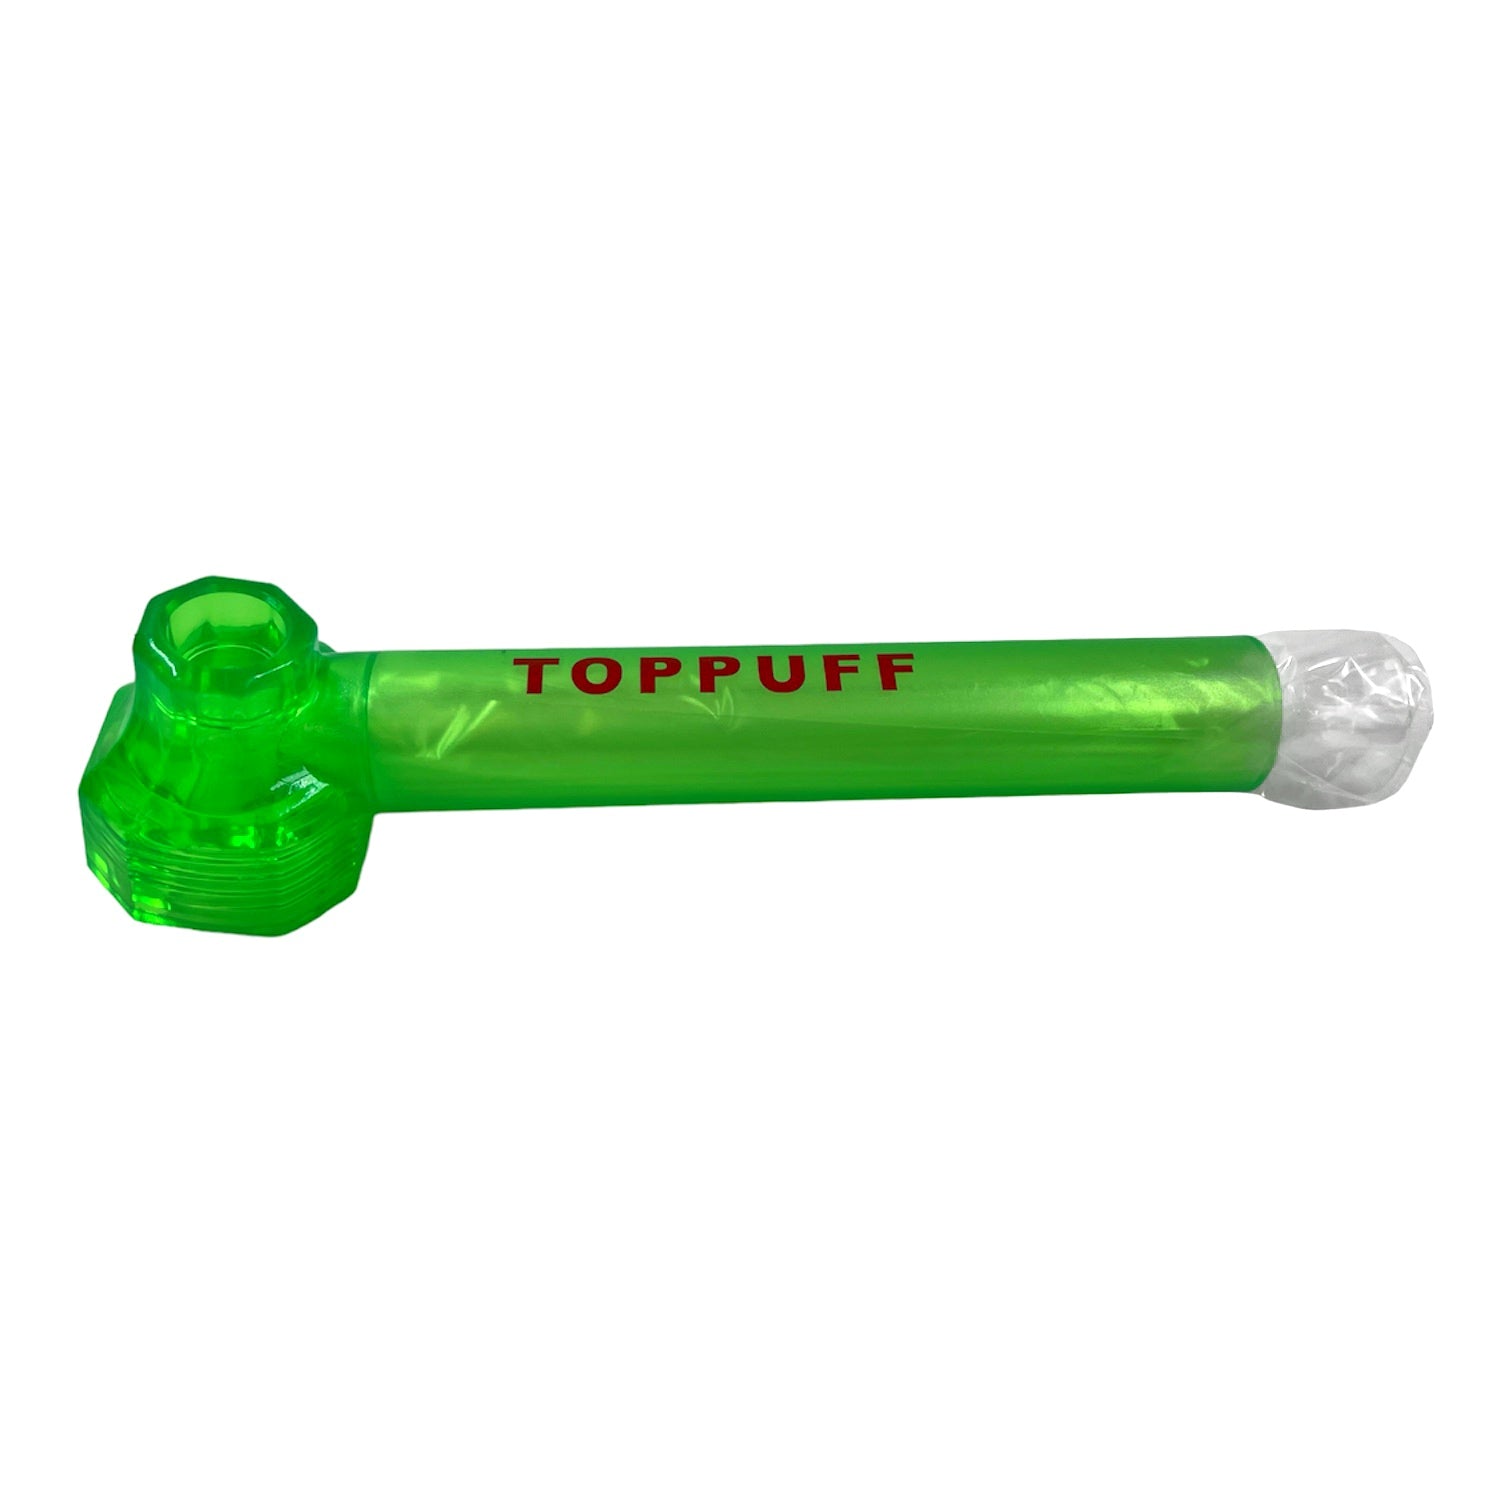 Top Puff Green Color